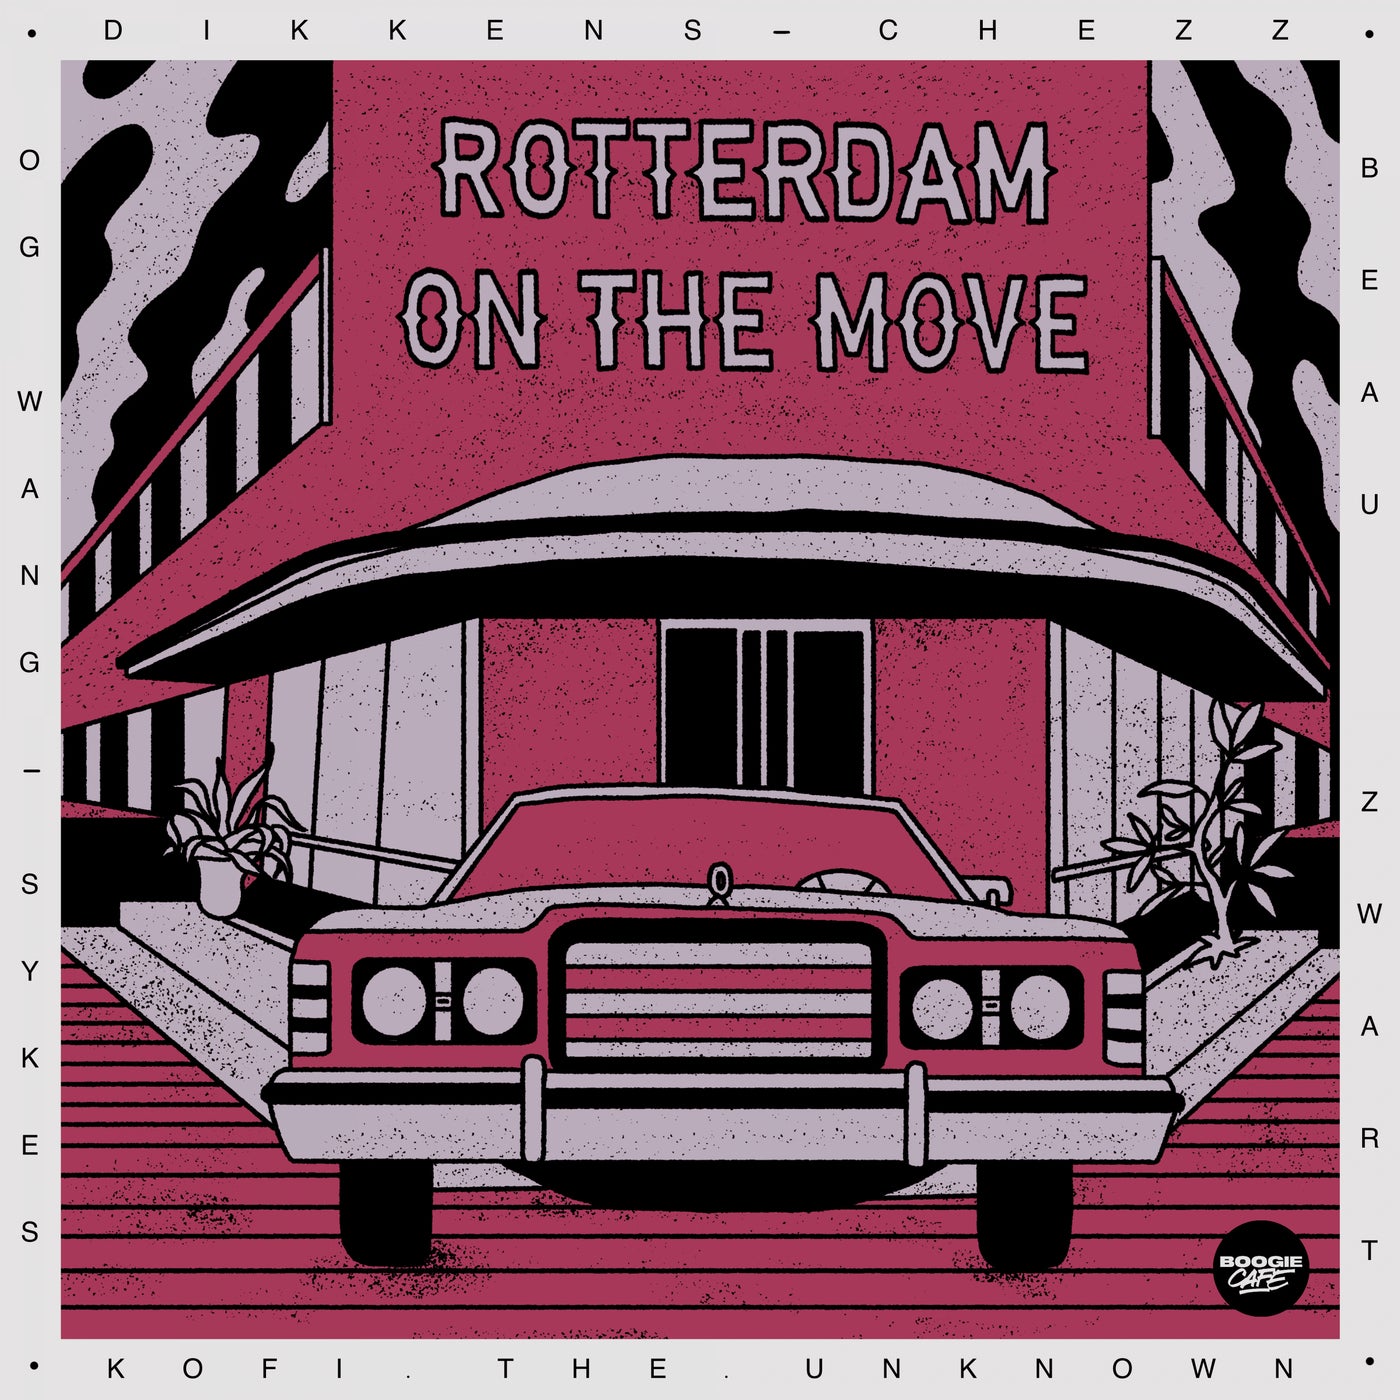 ROTTERDAM ON THE MOVE [BC027D]